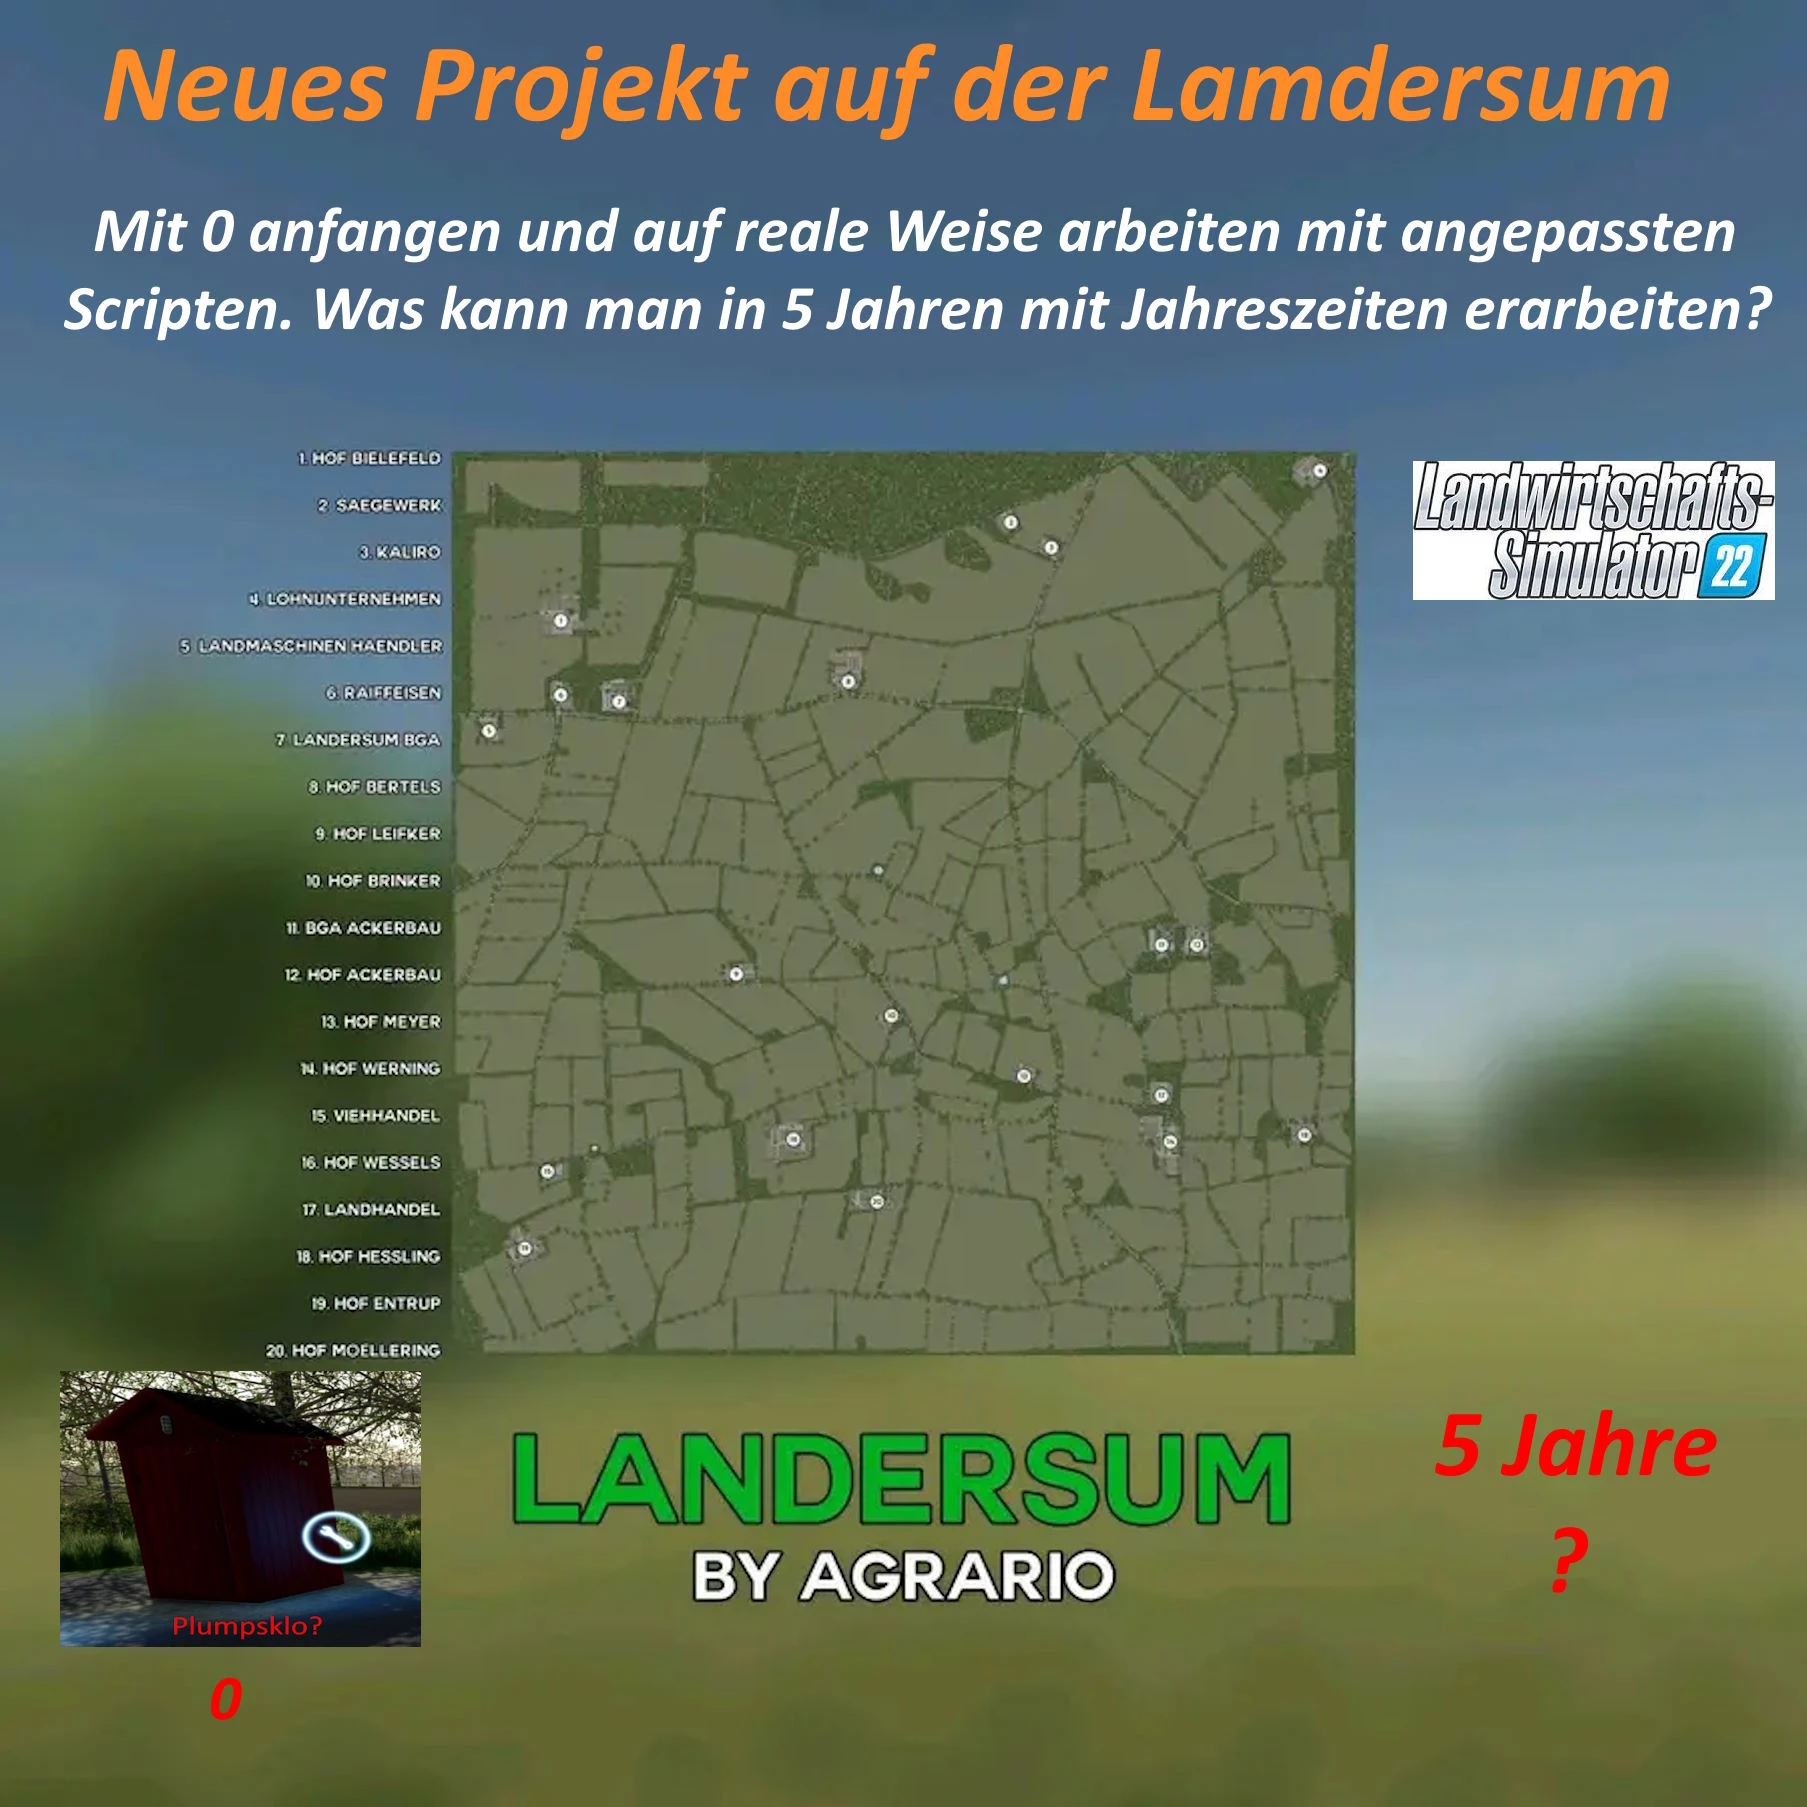 New project on the Landersum, starting from 0